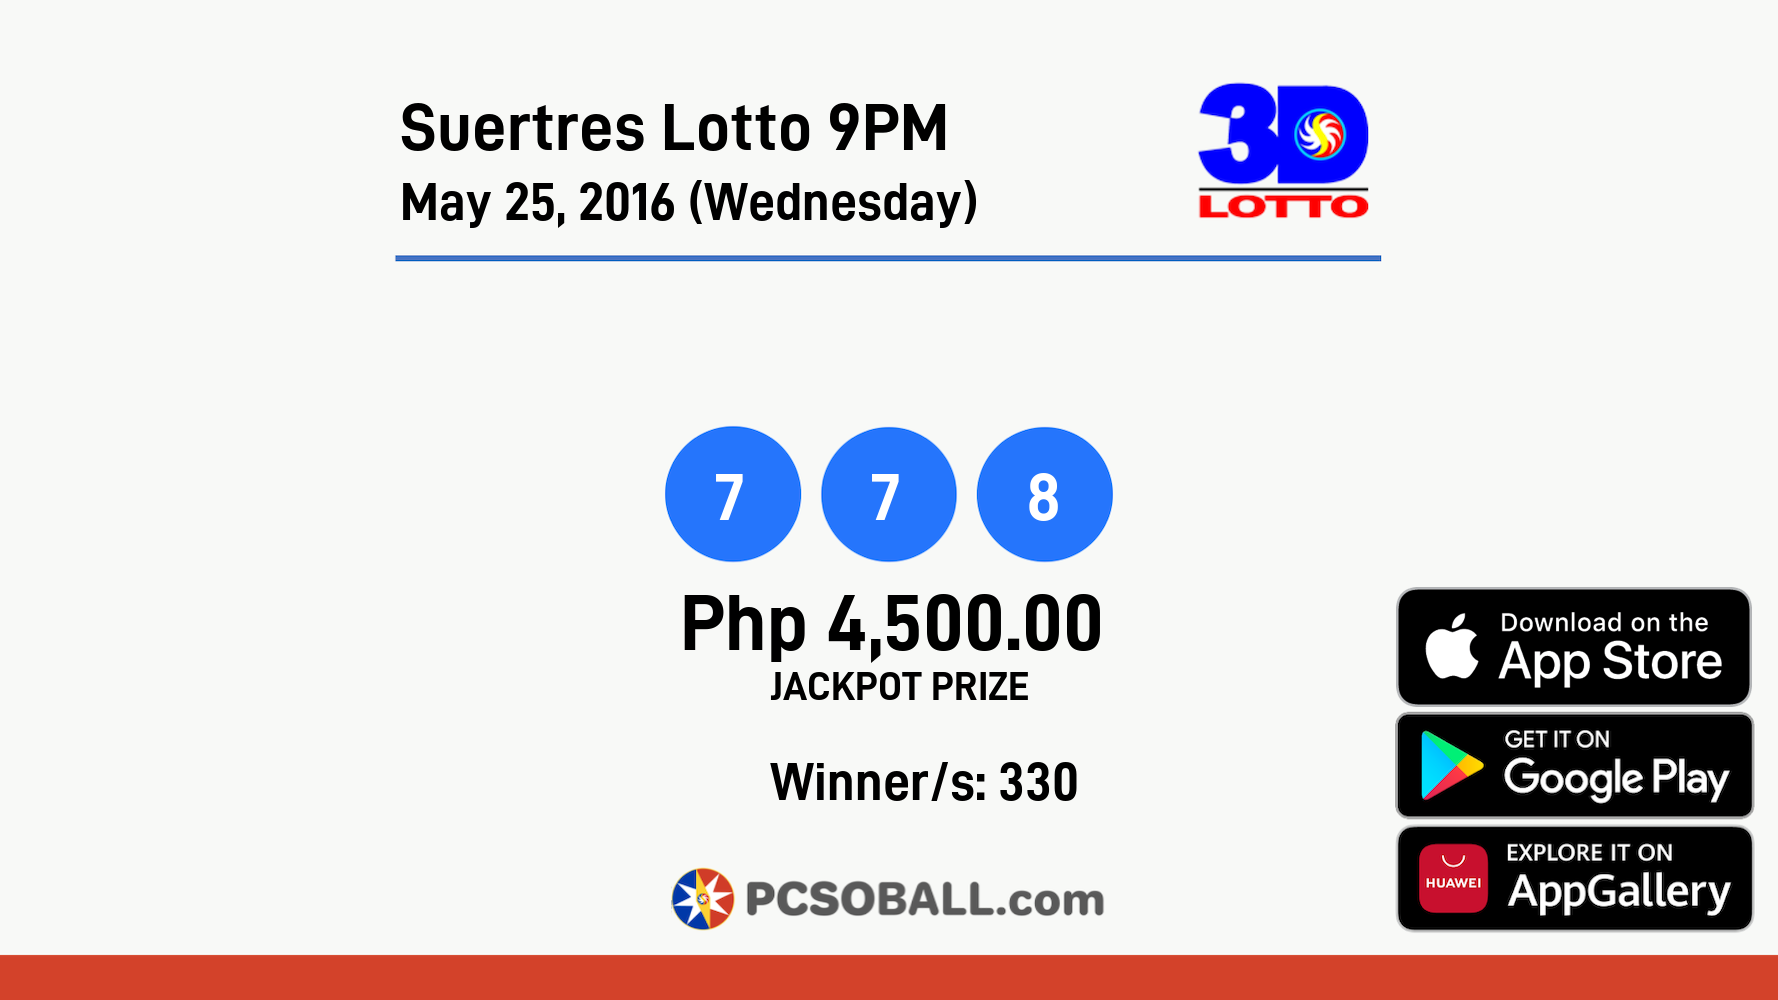 Suertres Lotto 9PM May 25, 2016 (Wednesday) Result